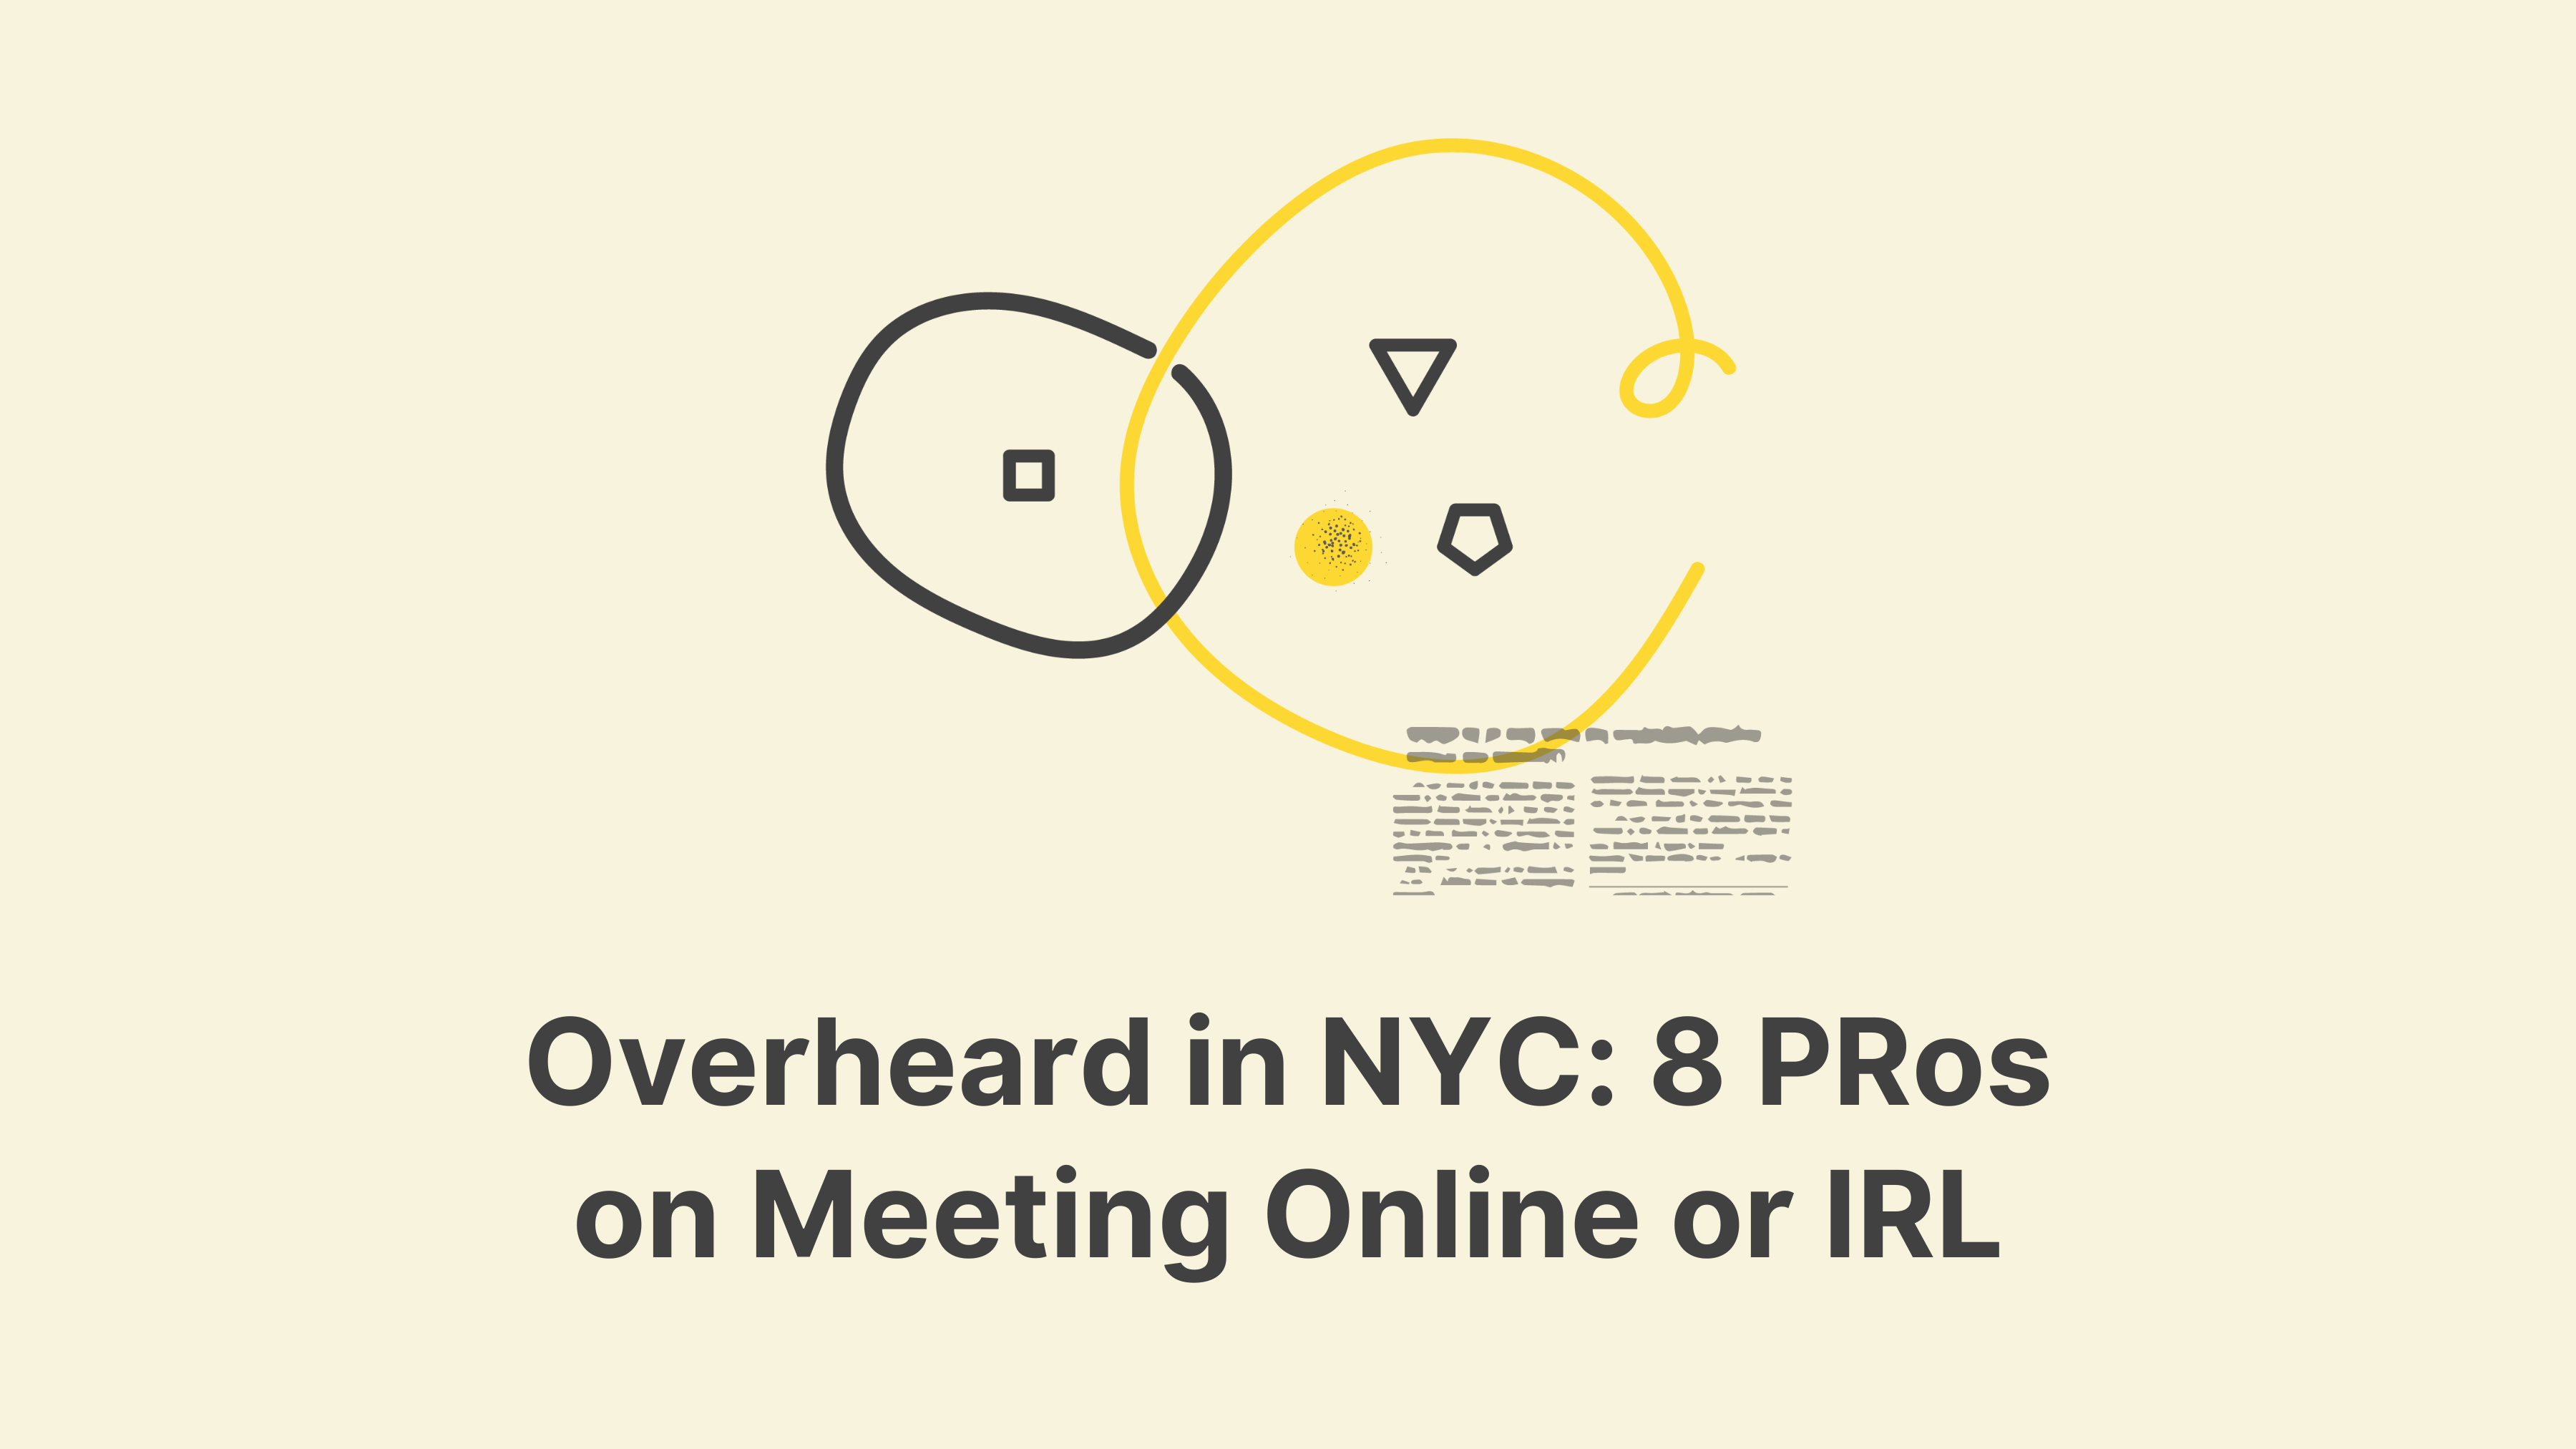 Overheard in NYC: 8 PRos on Meeting Online or IRL